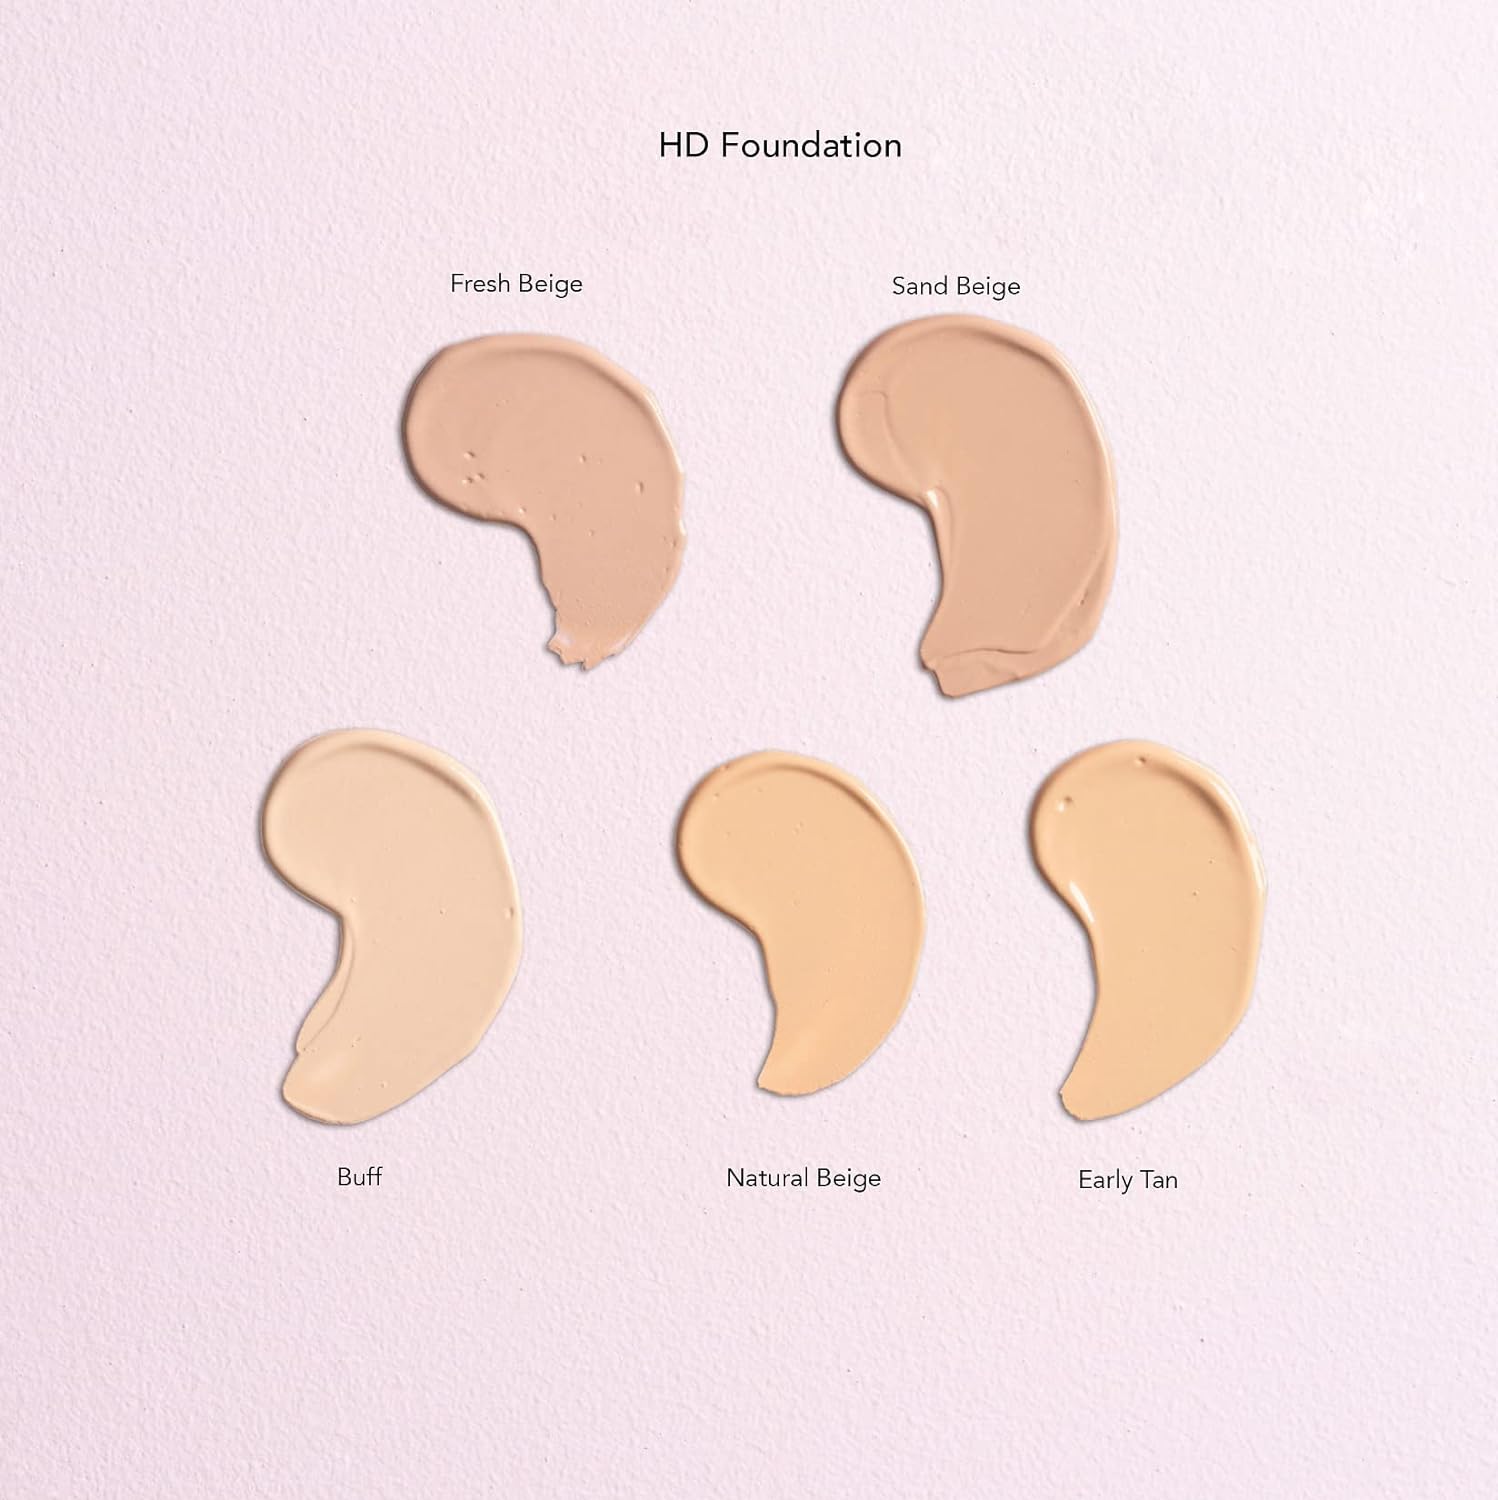 W7 | HD Foundation | Rich and Creamy Matte Formula | Medium Lasting Coverage | Available in 20 Shades | Early Tan | Cruelty Free, Vegan Liquid Foundation Makeup by W7 Cosmetics : Beauty & Personal Care